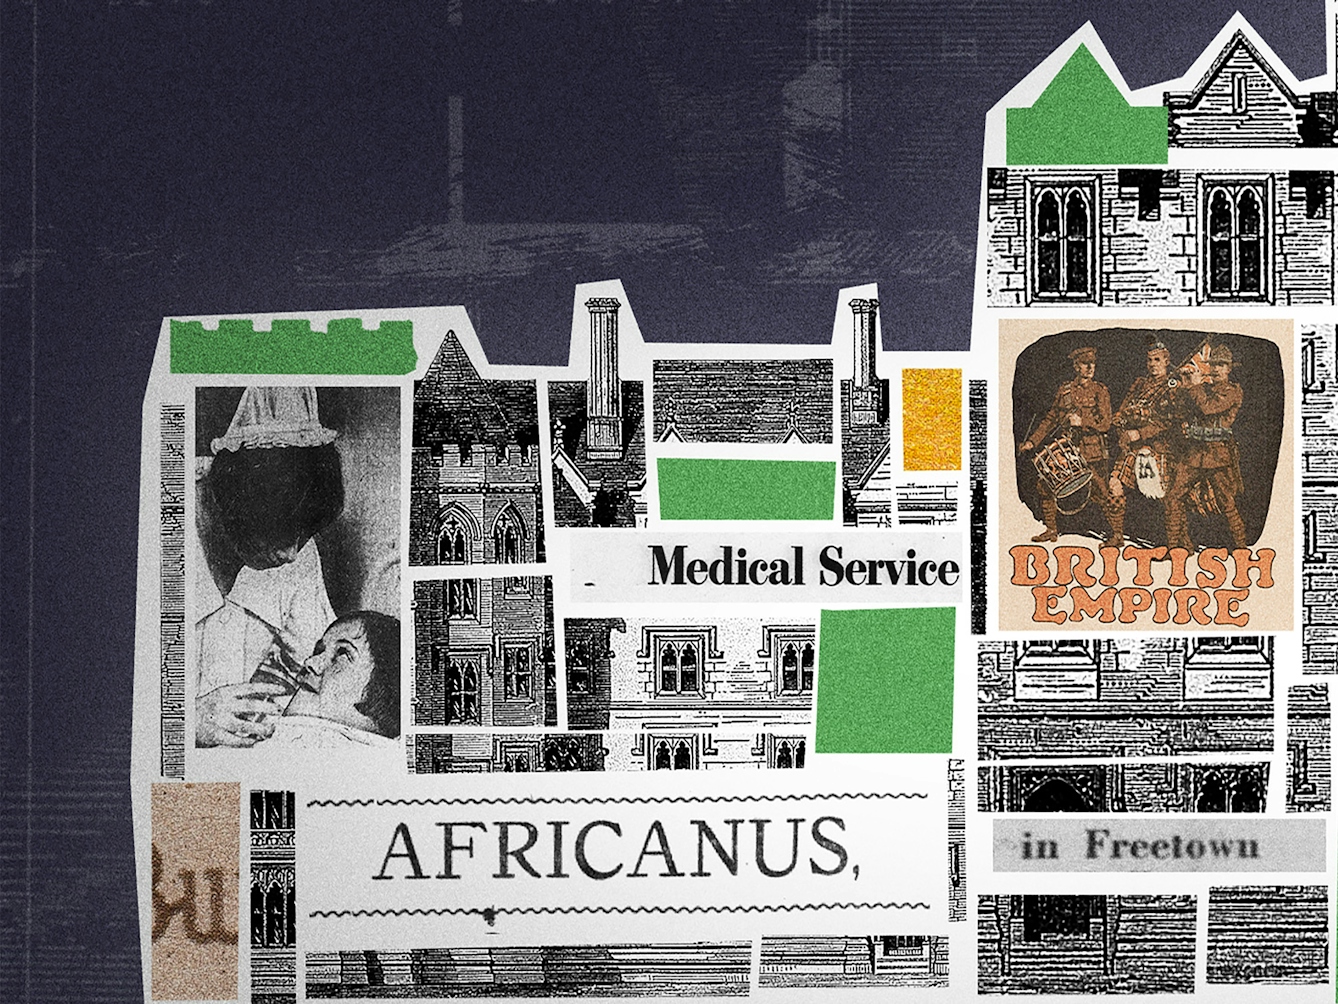 Crop from a larger digital collage. Shown is a building, labelled 'The London University'. The building's interior is filled with different collage elements, including newspaper cut-outs reading 'Africanus', 'Medical Service' and 'in Freetown'. Also shown in the building is an image of Kano (a city of Nigeria), images of the Bauchi Highlands, and a map of Nigeria. 